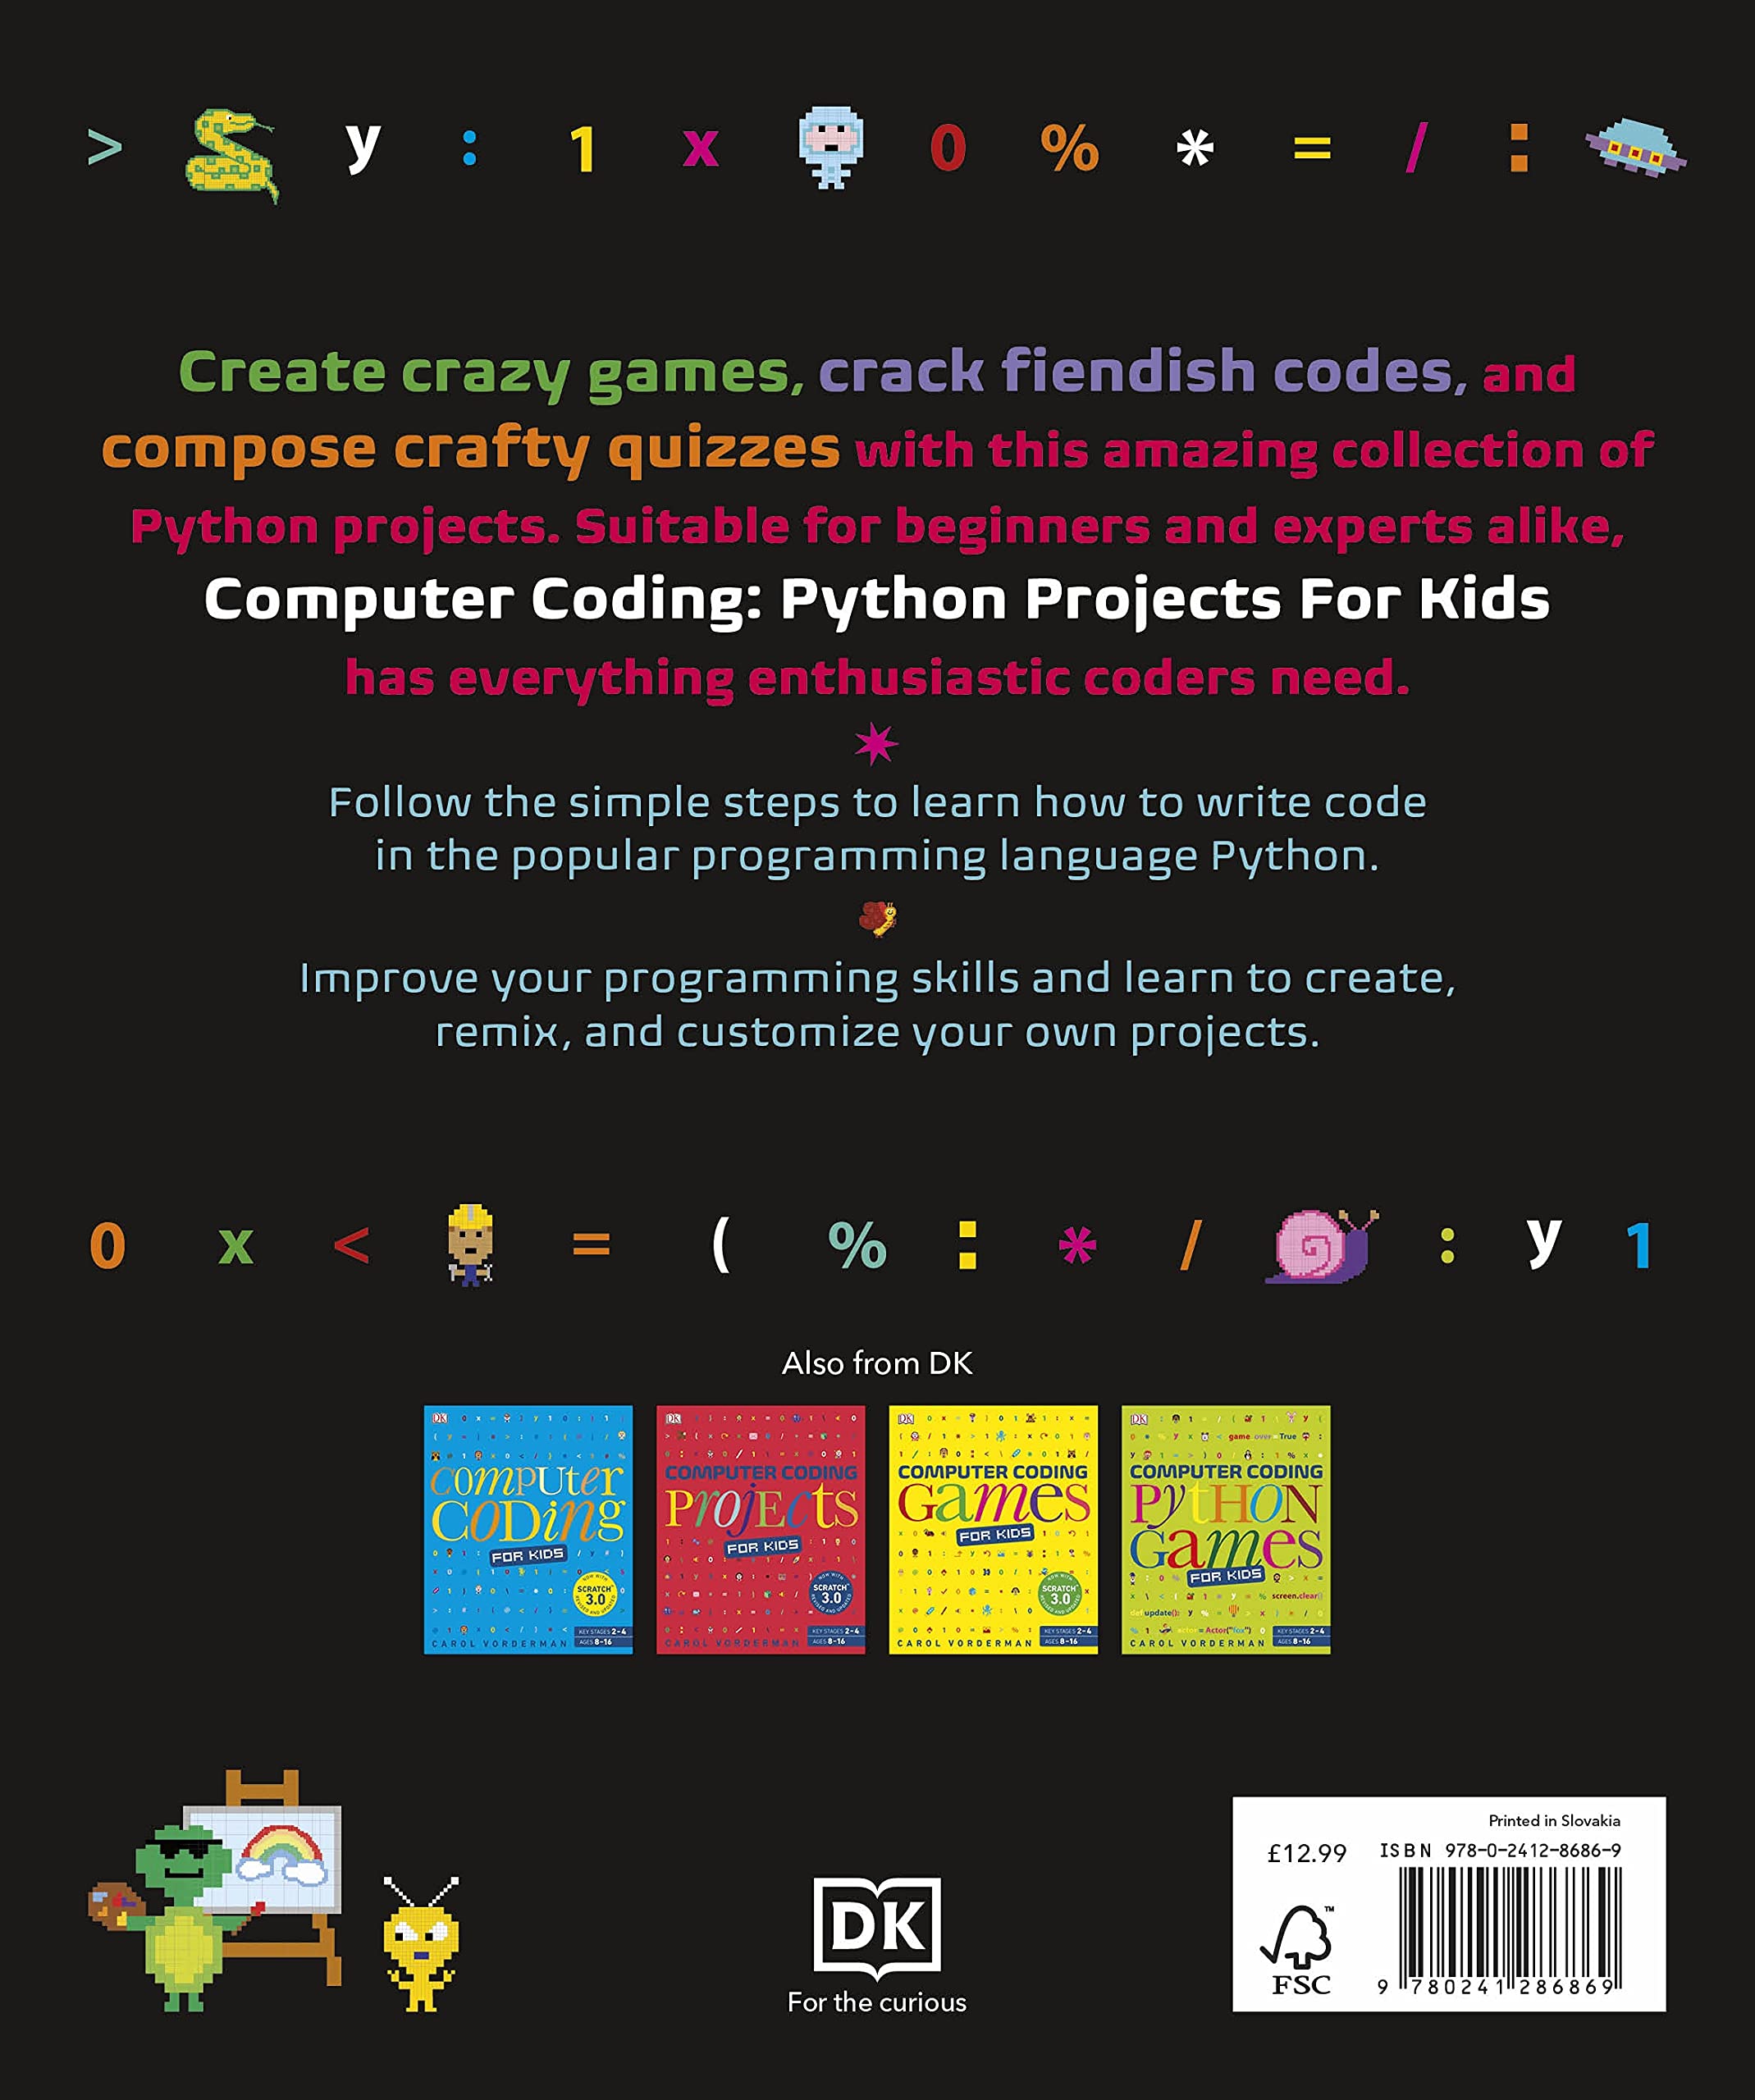 Computer Coding Python Projects For Kids A Stepbystep Visual Guide